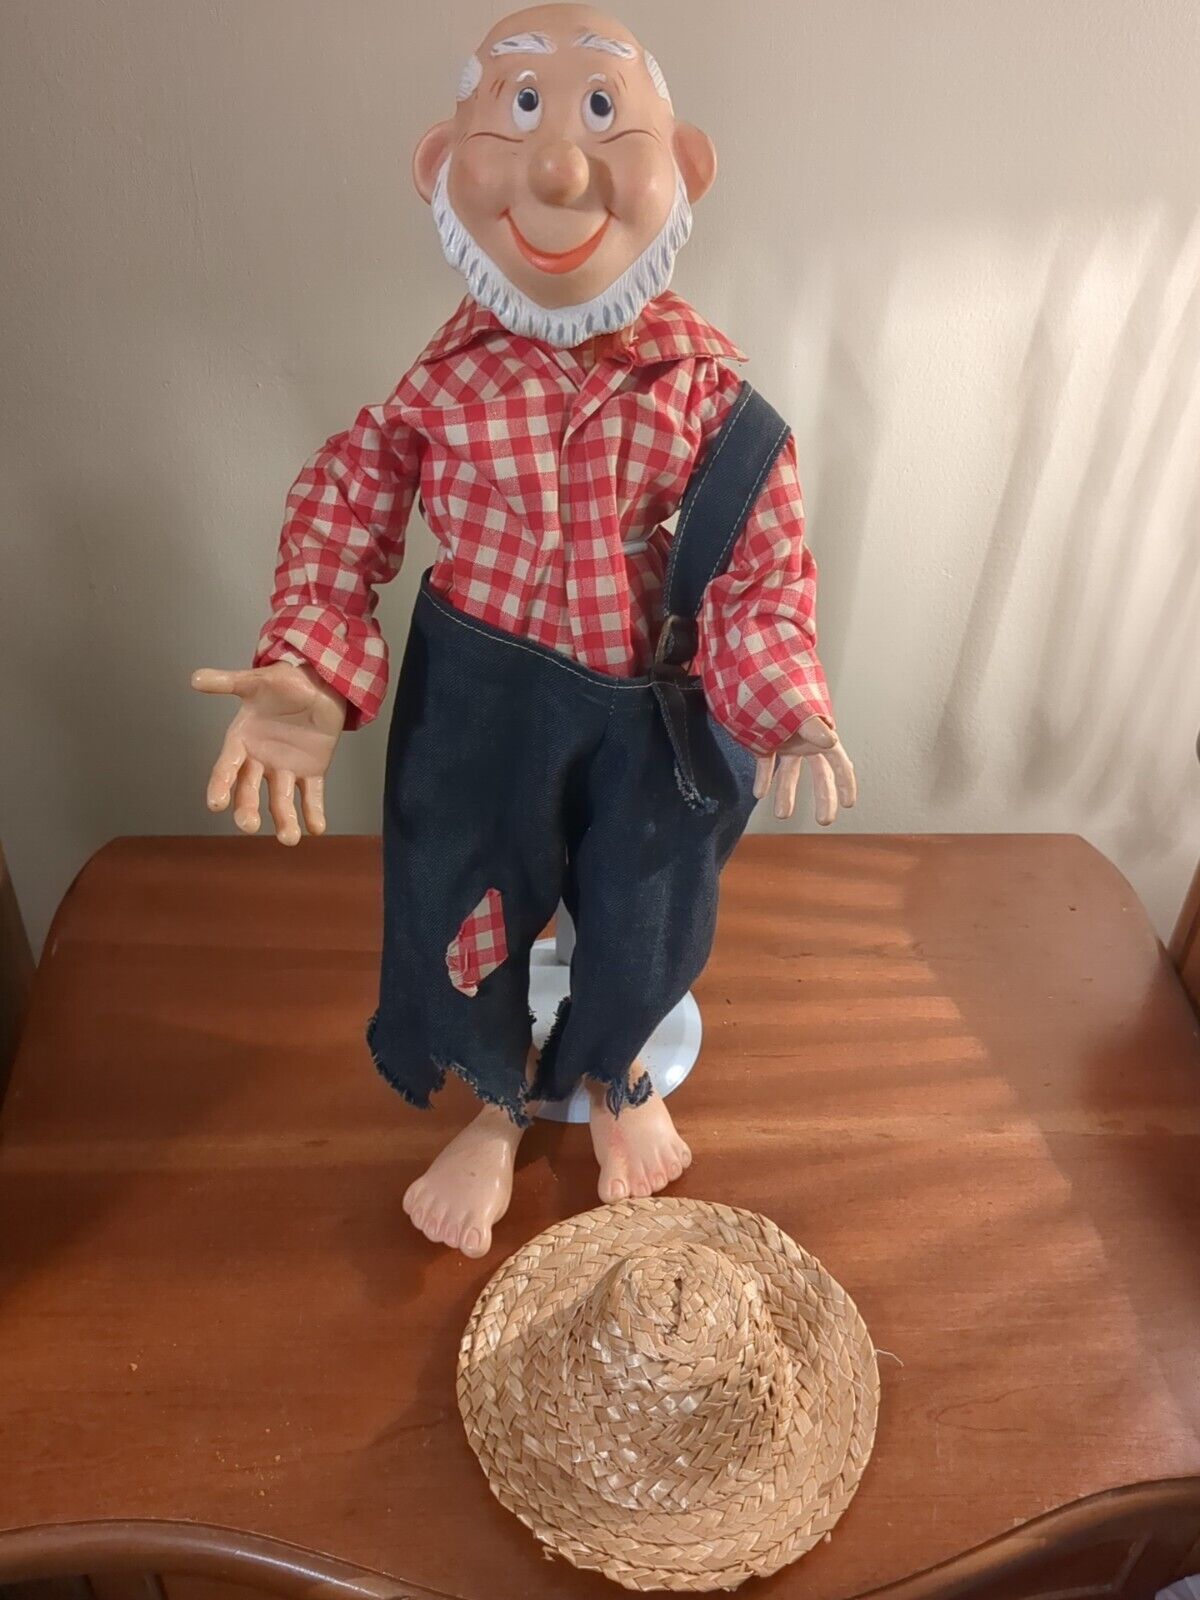 Vintage 1960s Mountain Dew Willy the Hillbilly Promo Doll 19”  Great Condition